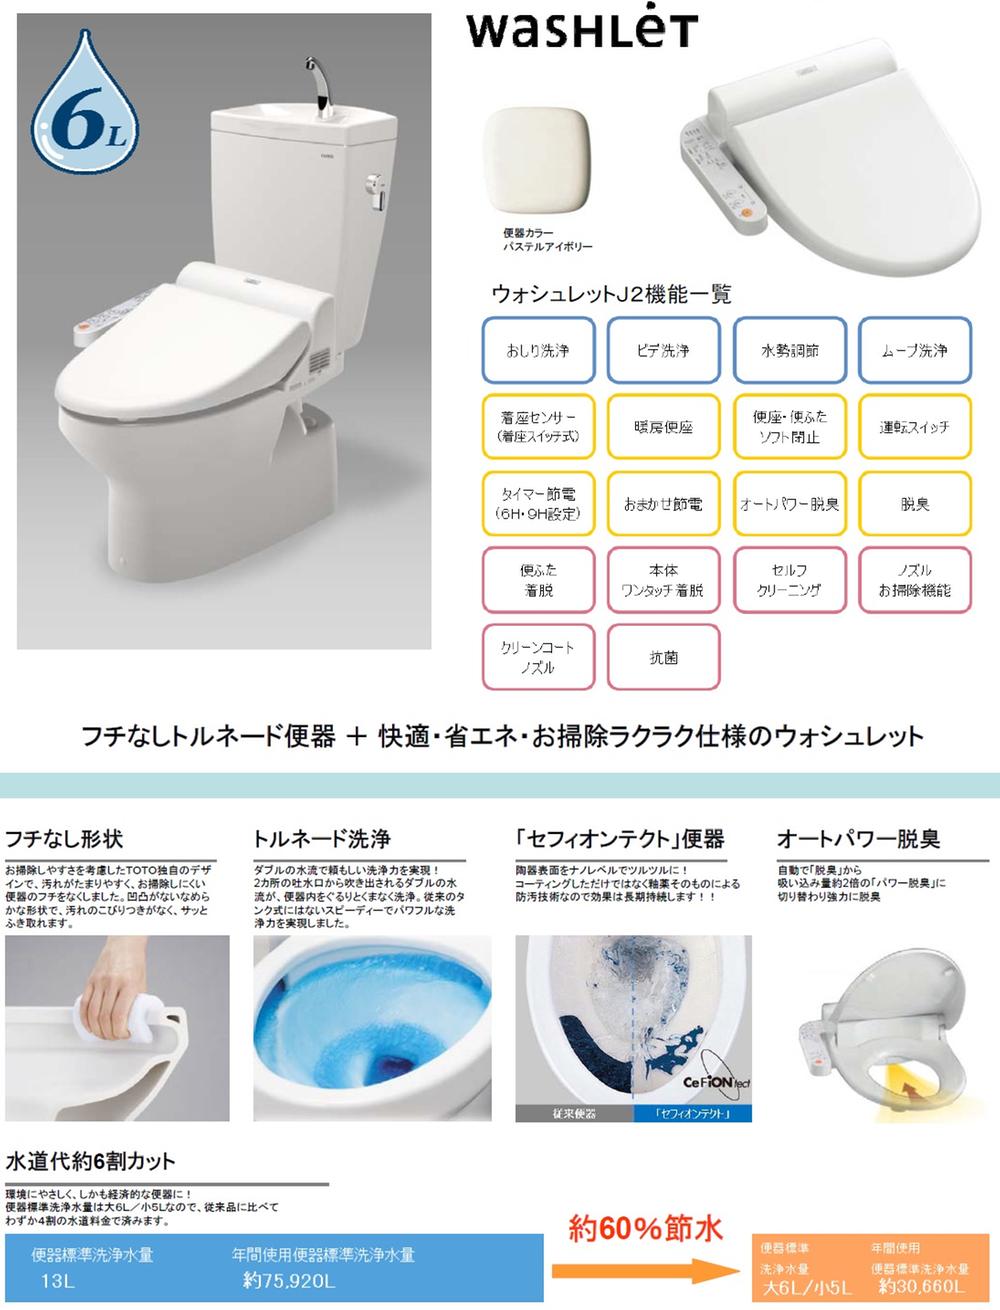 Toilet.  ■ TOTO made of toilet ・ Borderless shape in consideration of the cleaning ease ・ Tornado cleaning to wash all over the inside of the toilet bowl in the double of water flow ・ Coating to smooth the pottery surface at the nano level